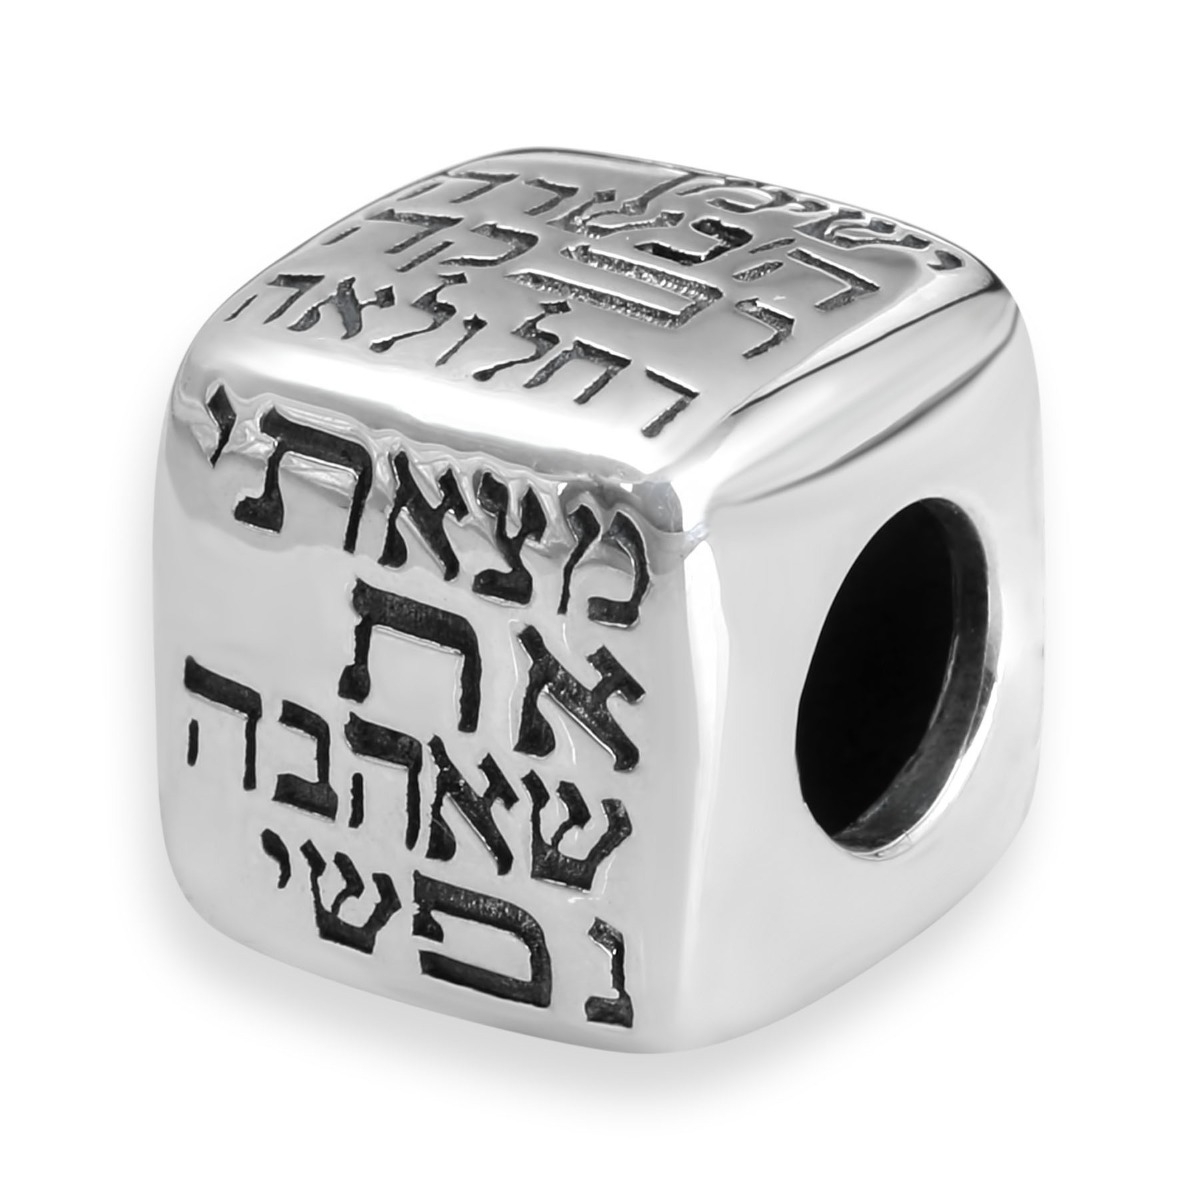 Sterling Silver Multiple Jewish Verses Bead Charm (Song of Songs 3:4, Proverbs 31:10, Proverbs 31:29) - 1